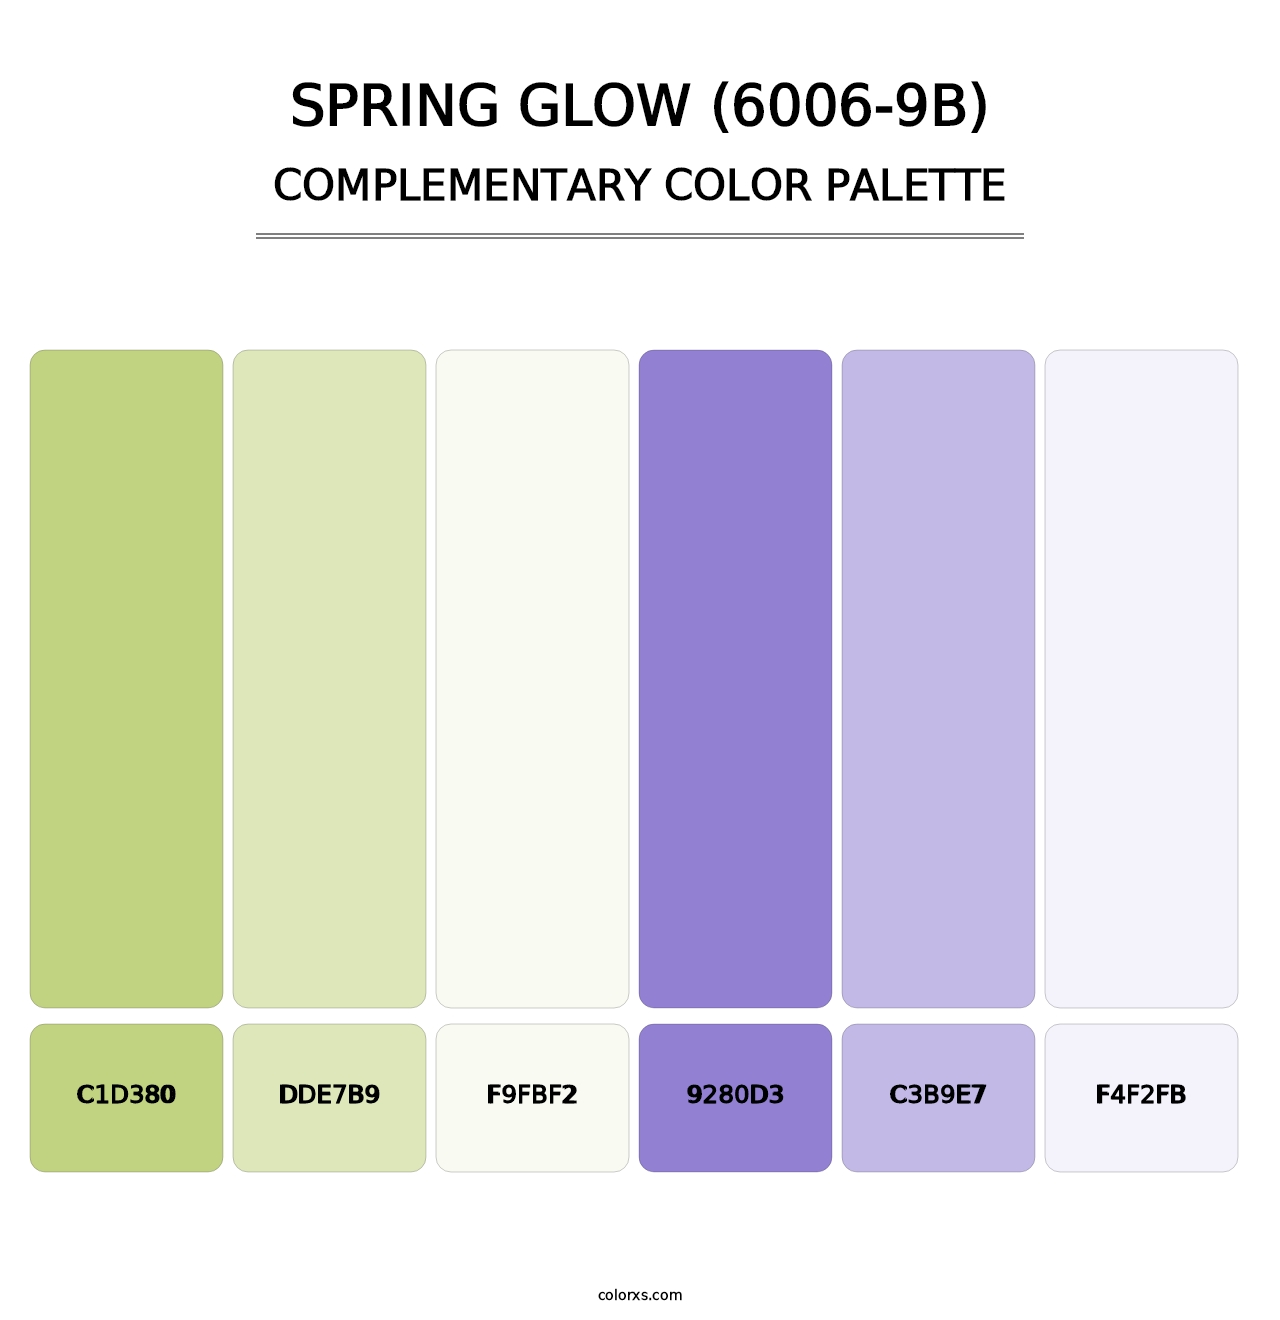 Spring Glow (6006-9B) - Complementary Color Palette